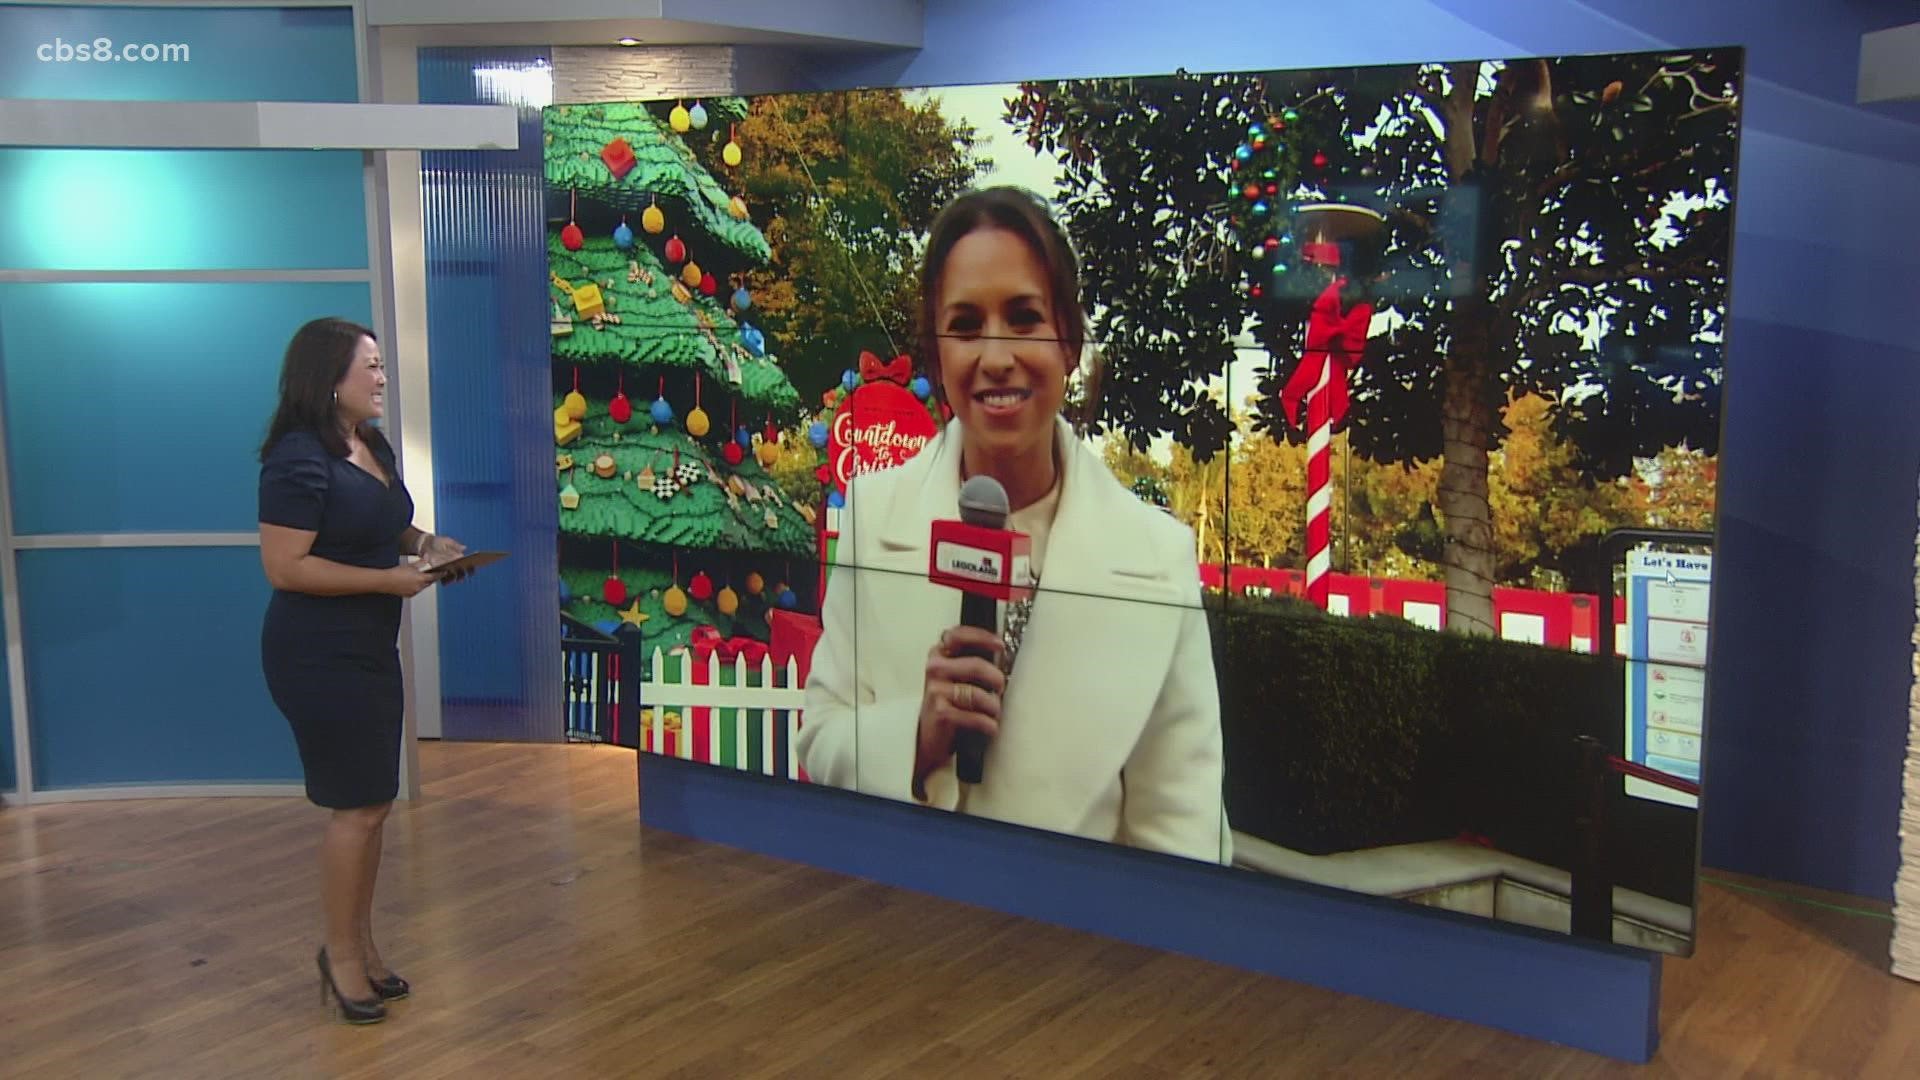 The holiday season has arrived at Legoland and this year's festivities got underway Friday, November 19. Lighting the tree is actress Lacey Chabert.